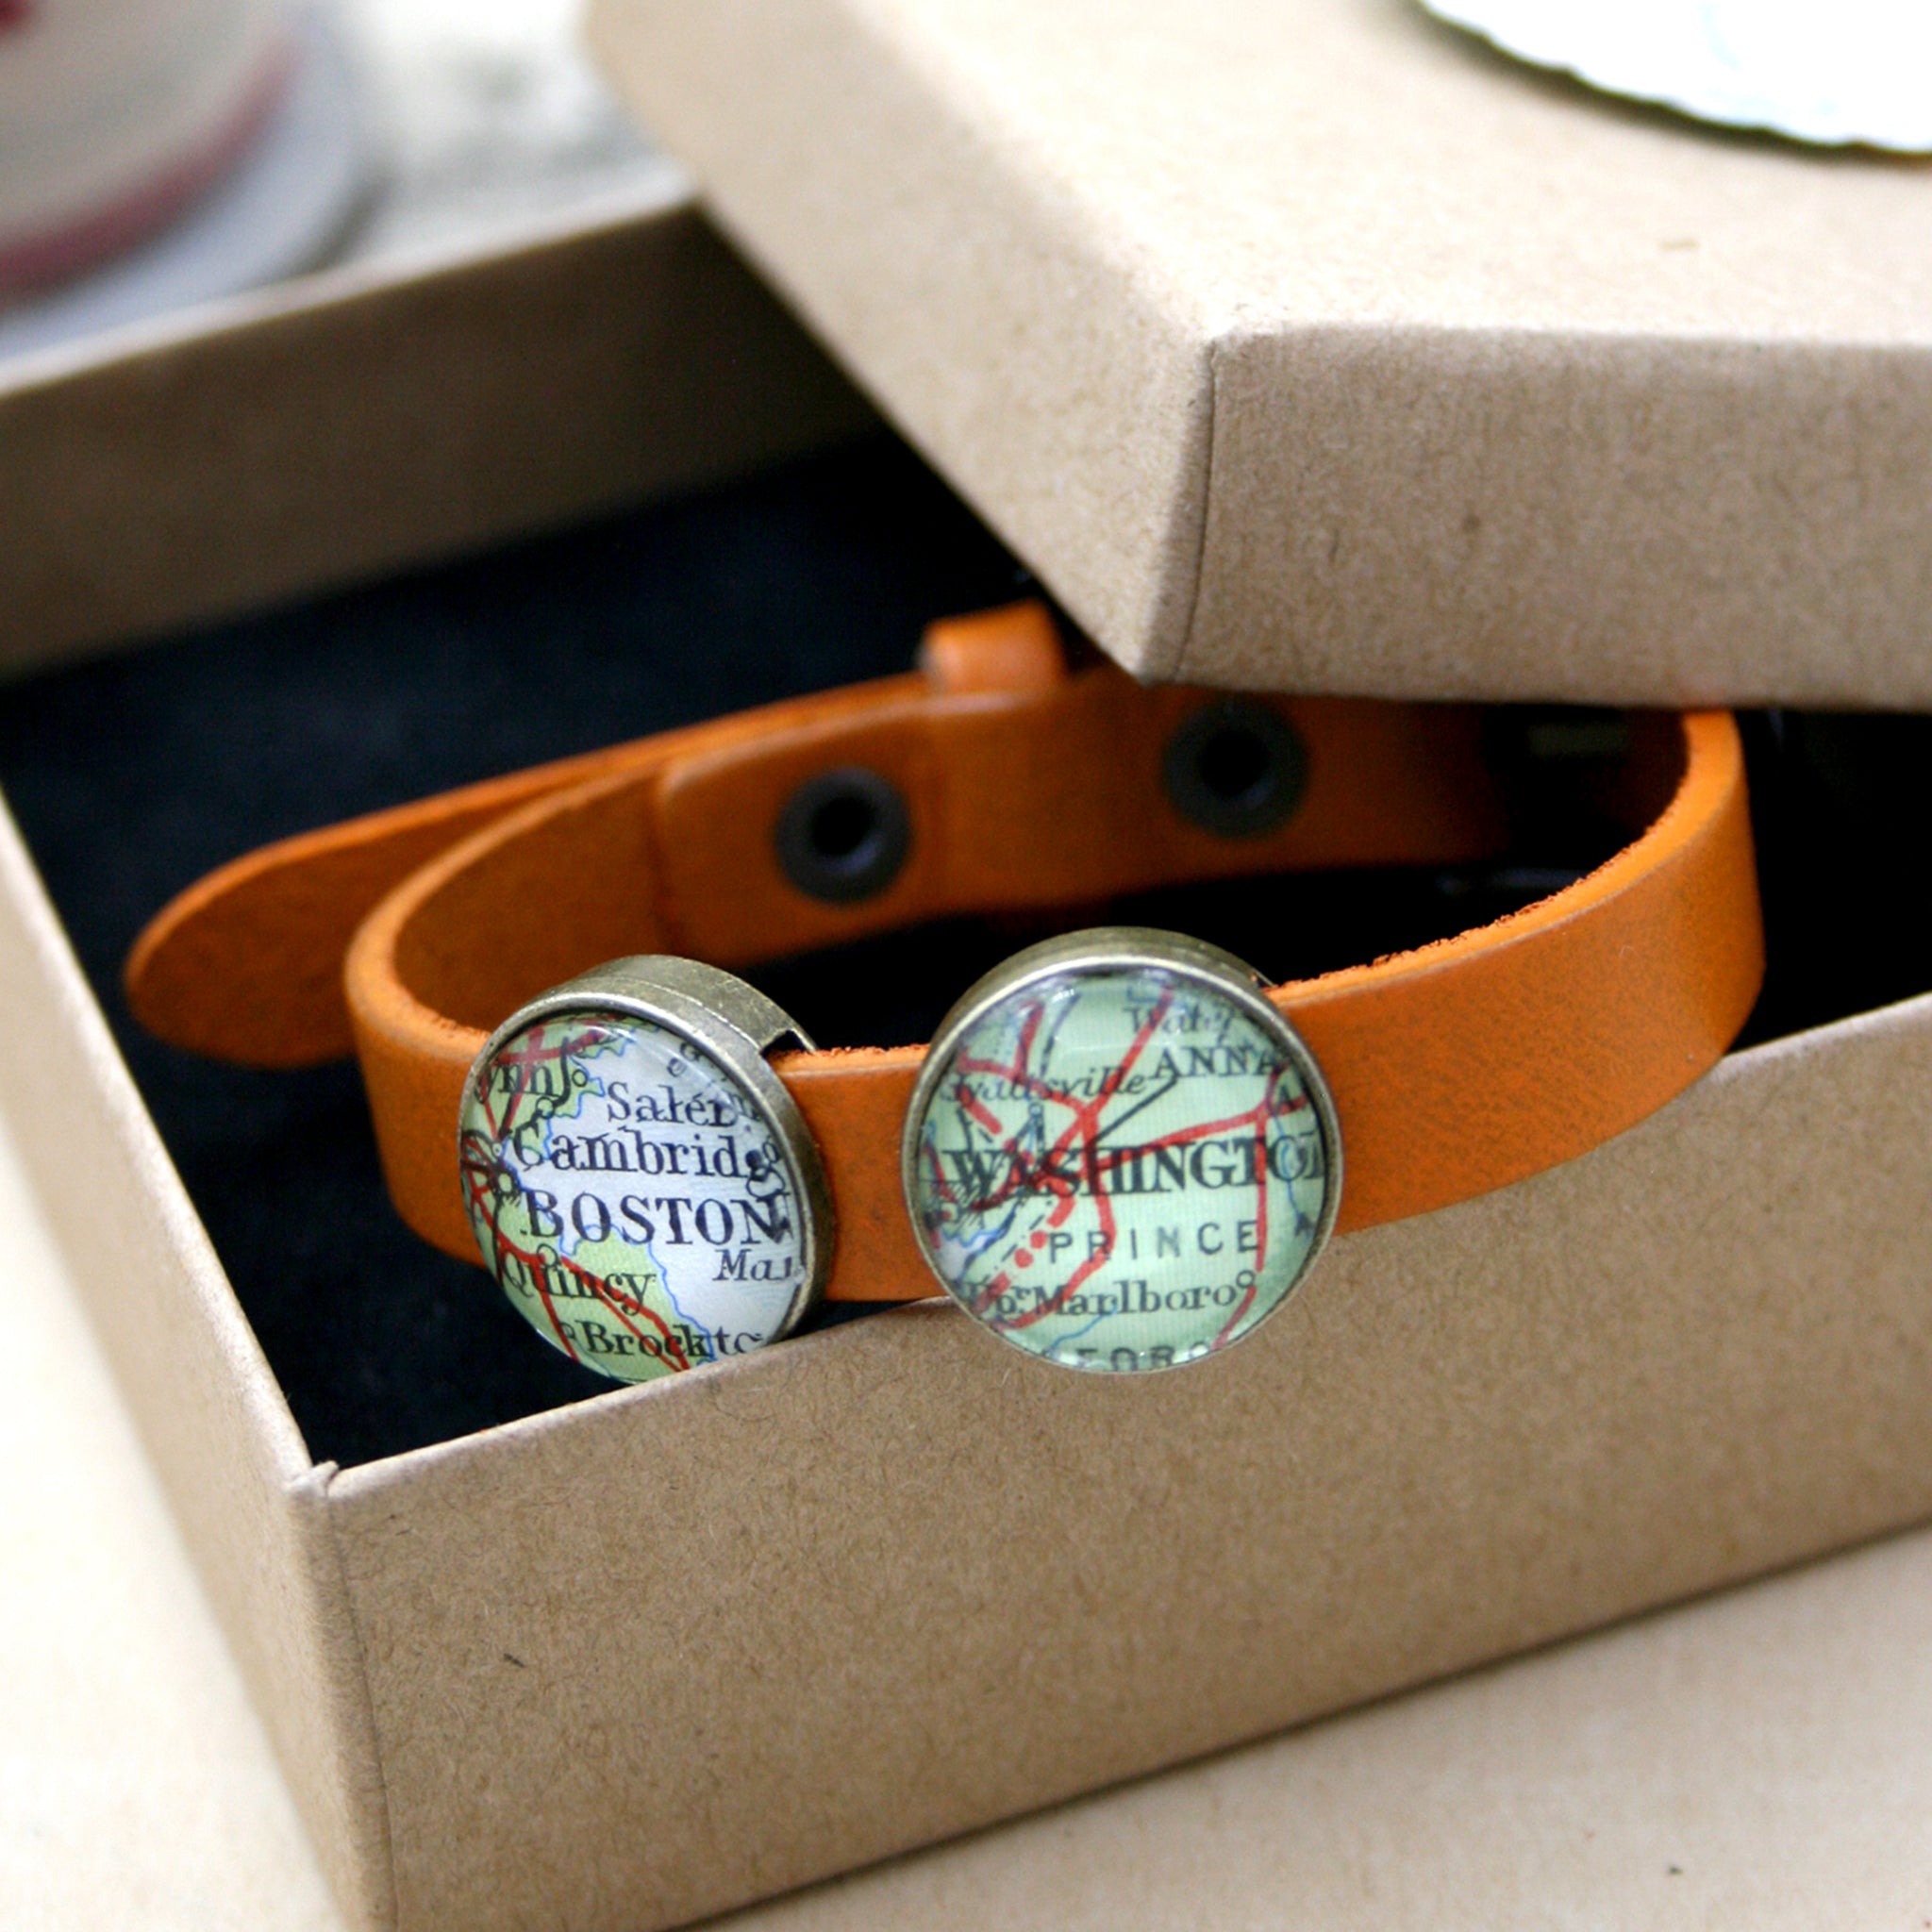 Orange leather bracelet featuring map locations in a box